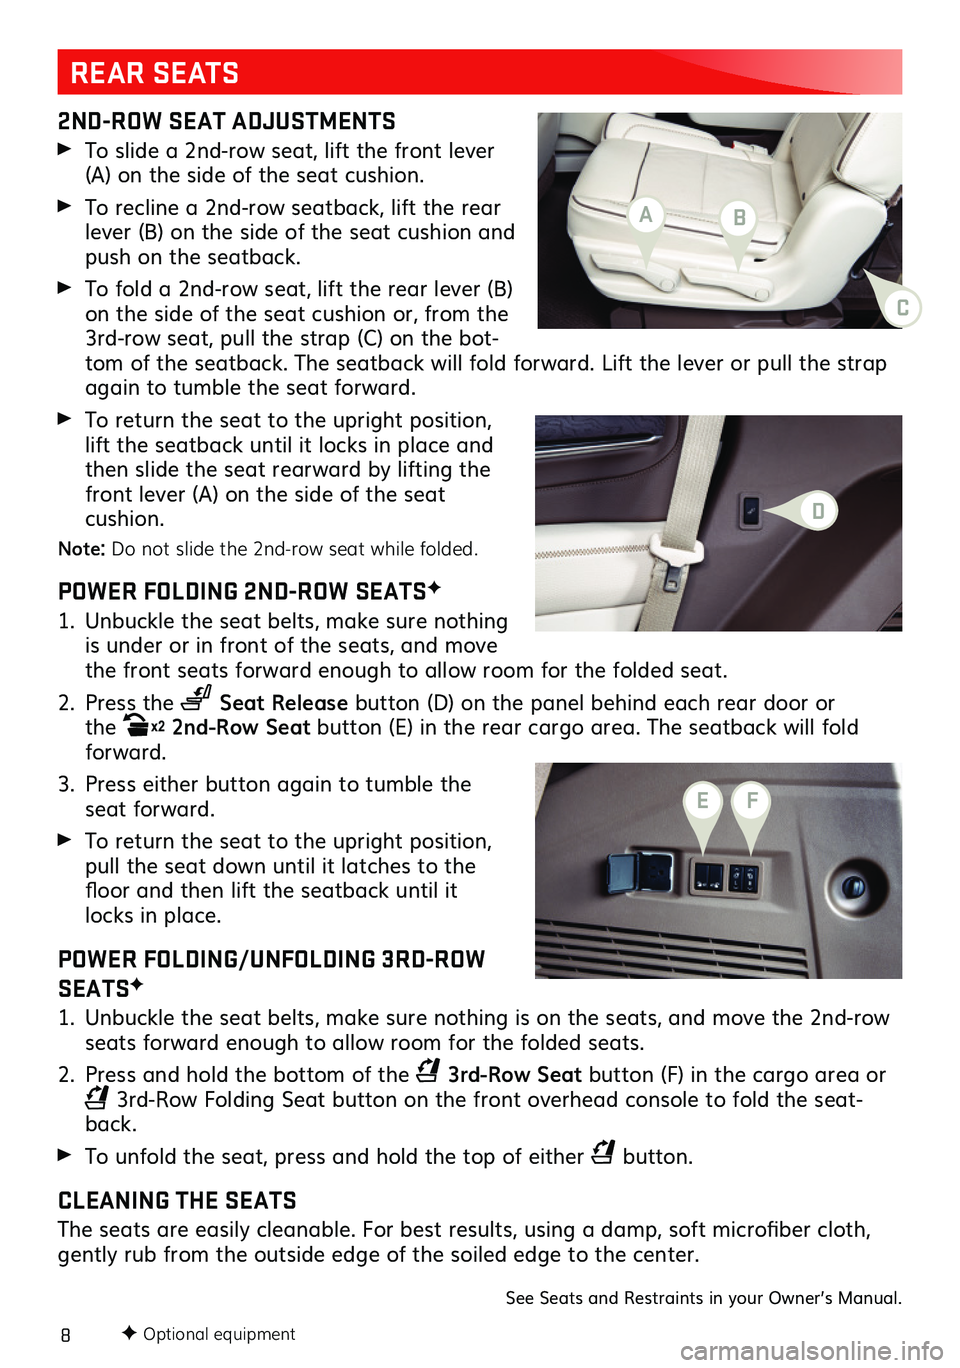 GMC YUKON 2021  Get To Know Guide 8
2ND-ROW SEAT ADJUSTMENTS
 To slide a 2nd-row seat, lift the front lever (A) on the side of the seat cushion.
 To recline a 2nd-row seatback, lift the rear lever (B) on the side of the seat cushion a